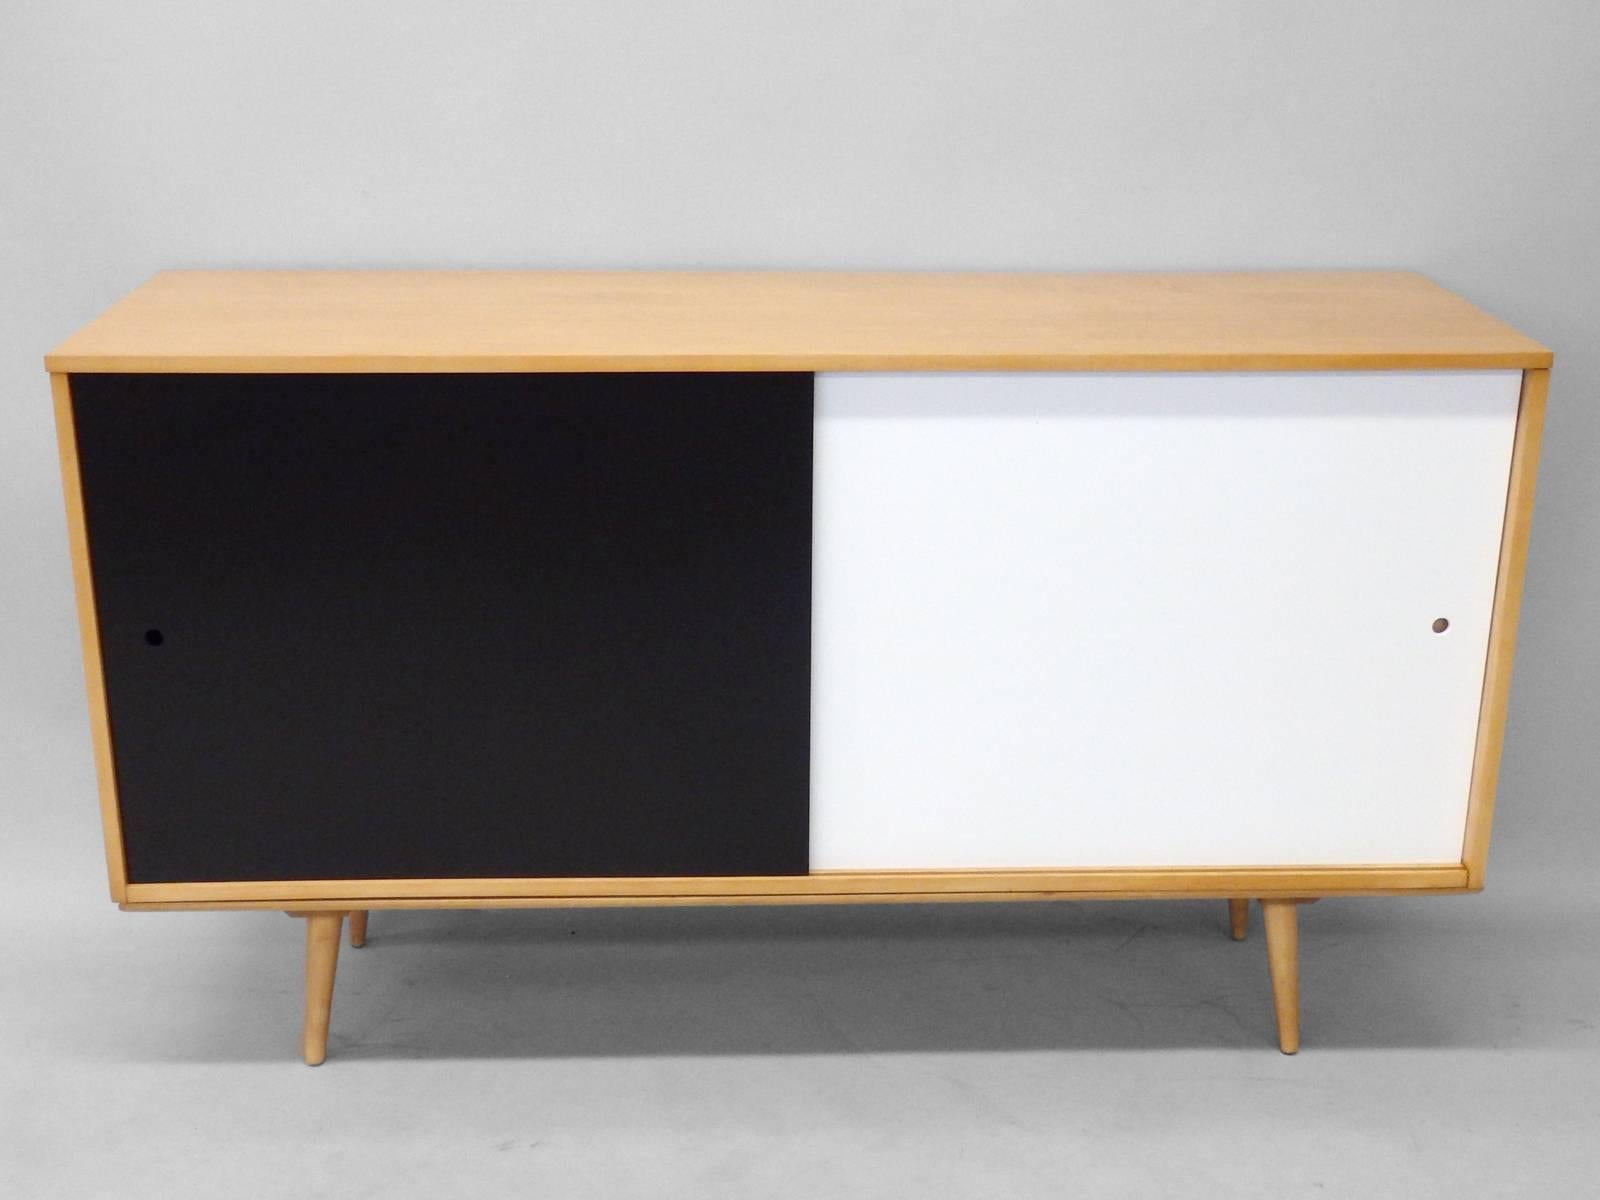 Sliding door cabinet by Paul McCobb for Winchedon.